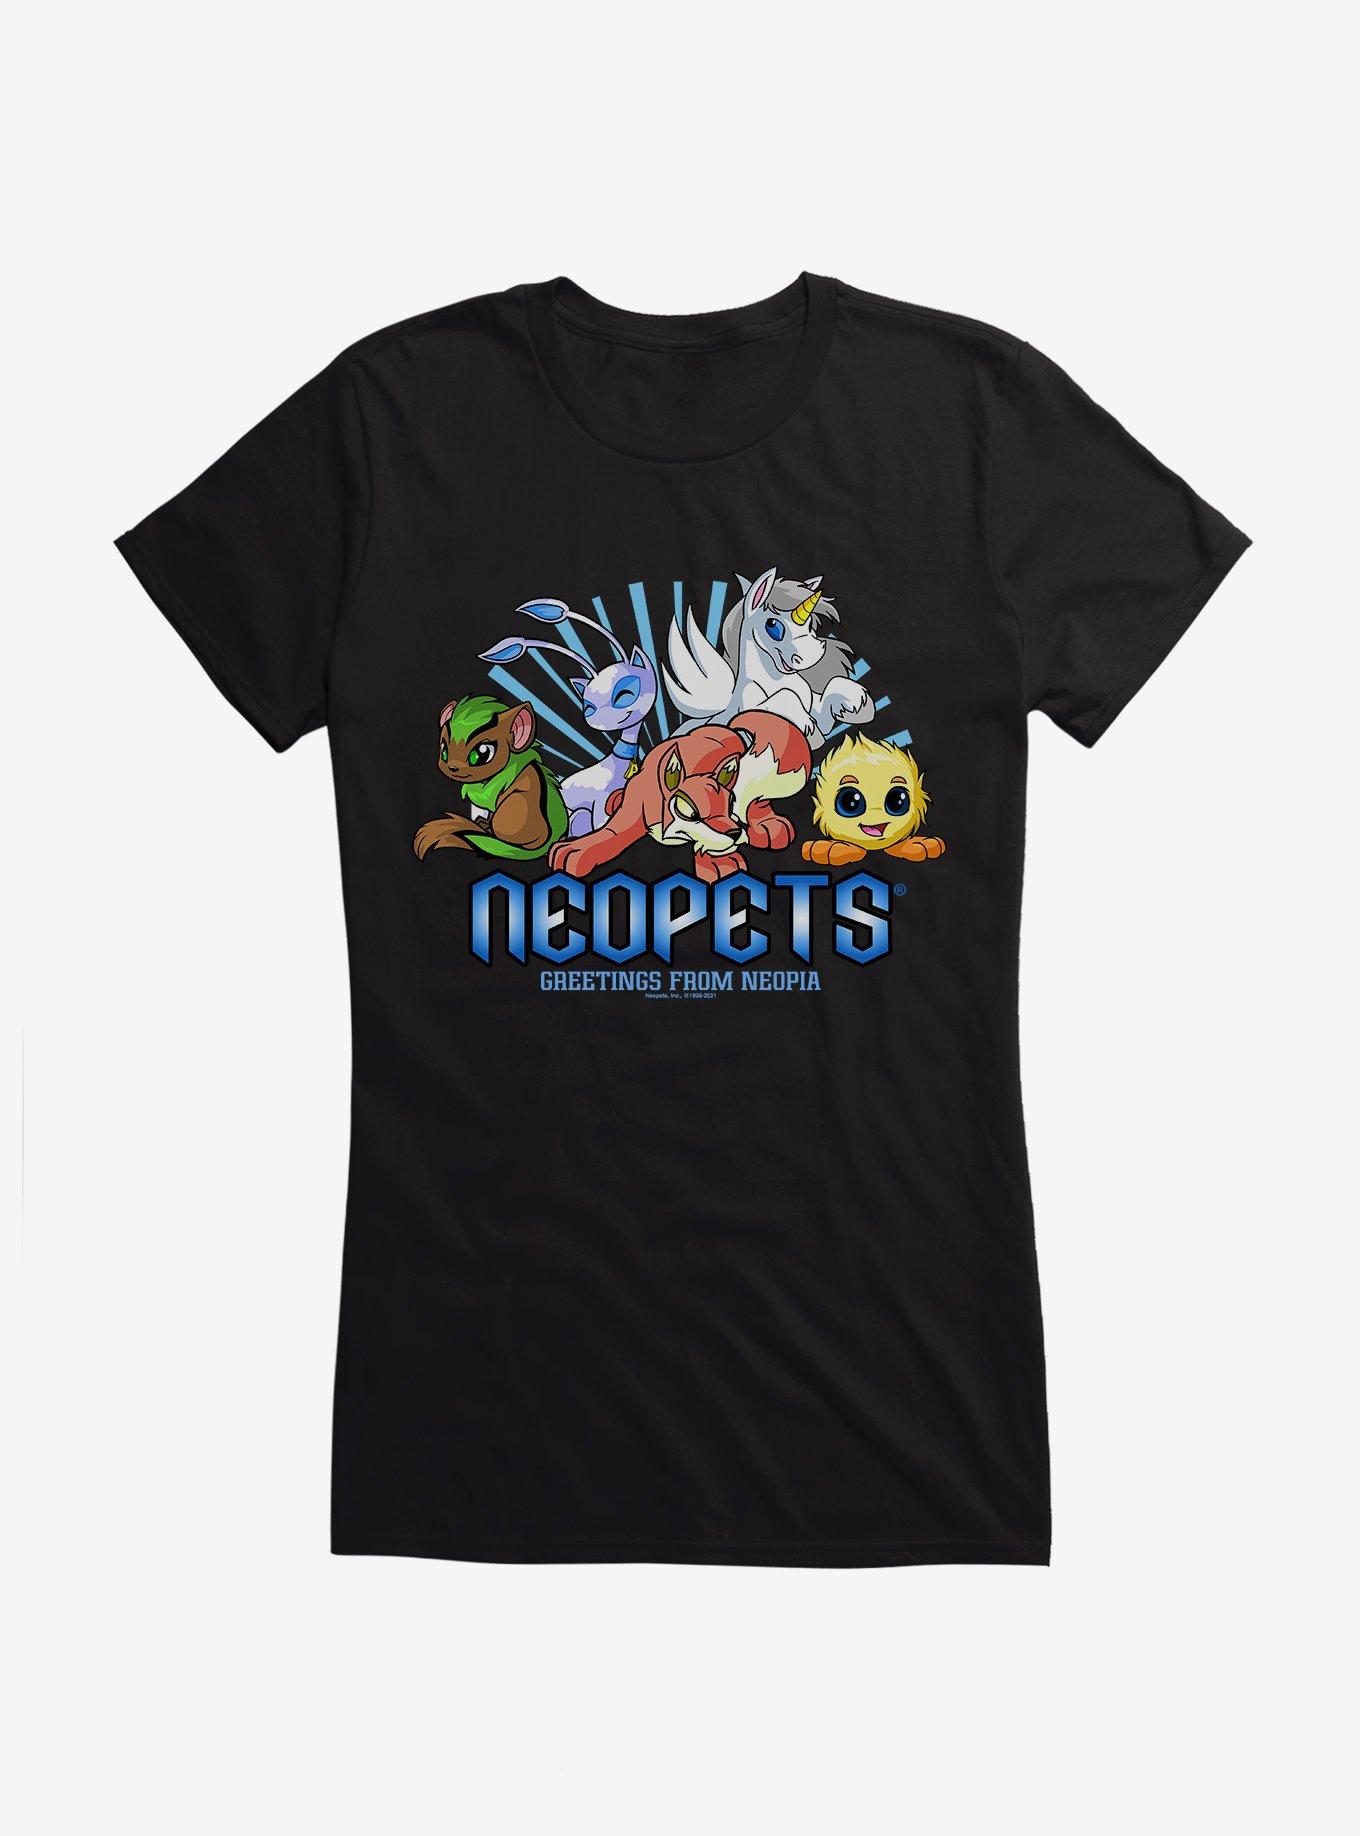 Neopets Greetings From Neopia Girls T-Shirt, BLACK, hi-res